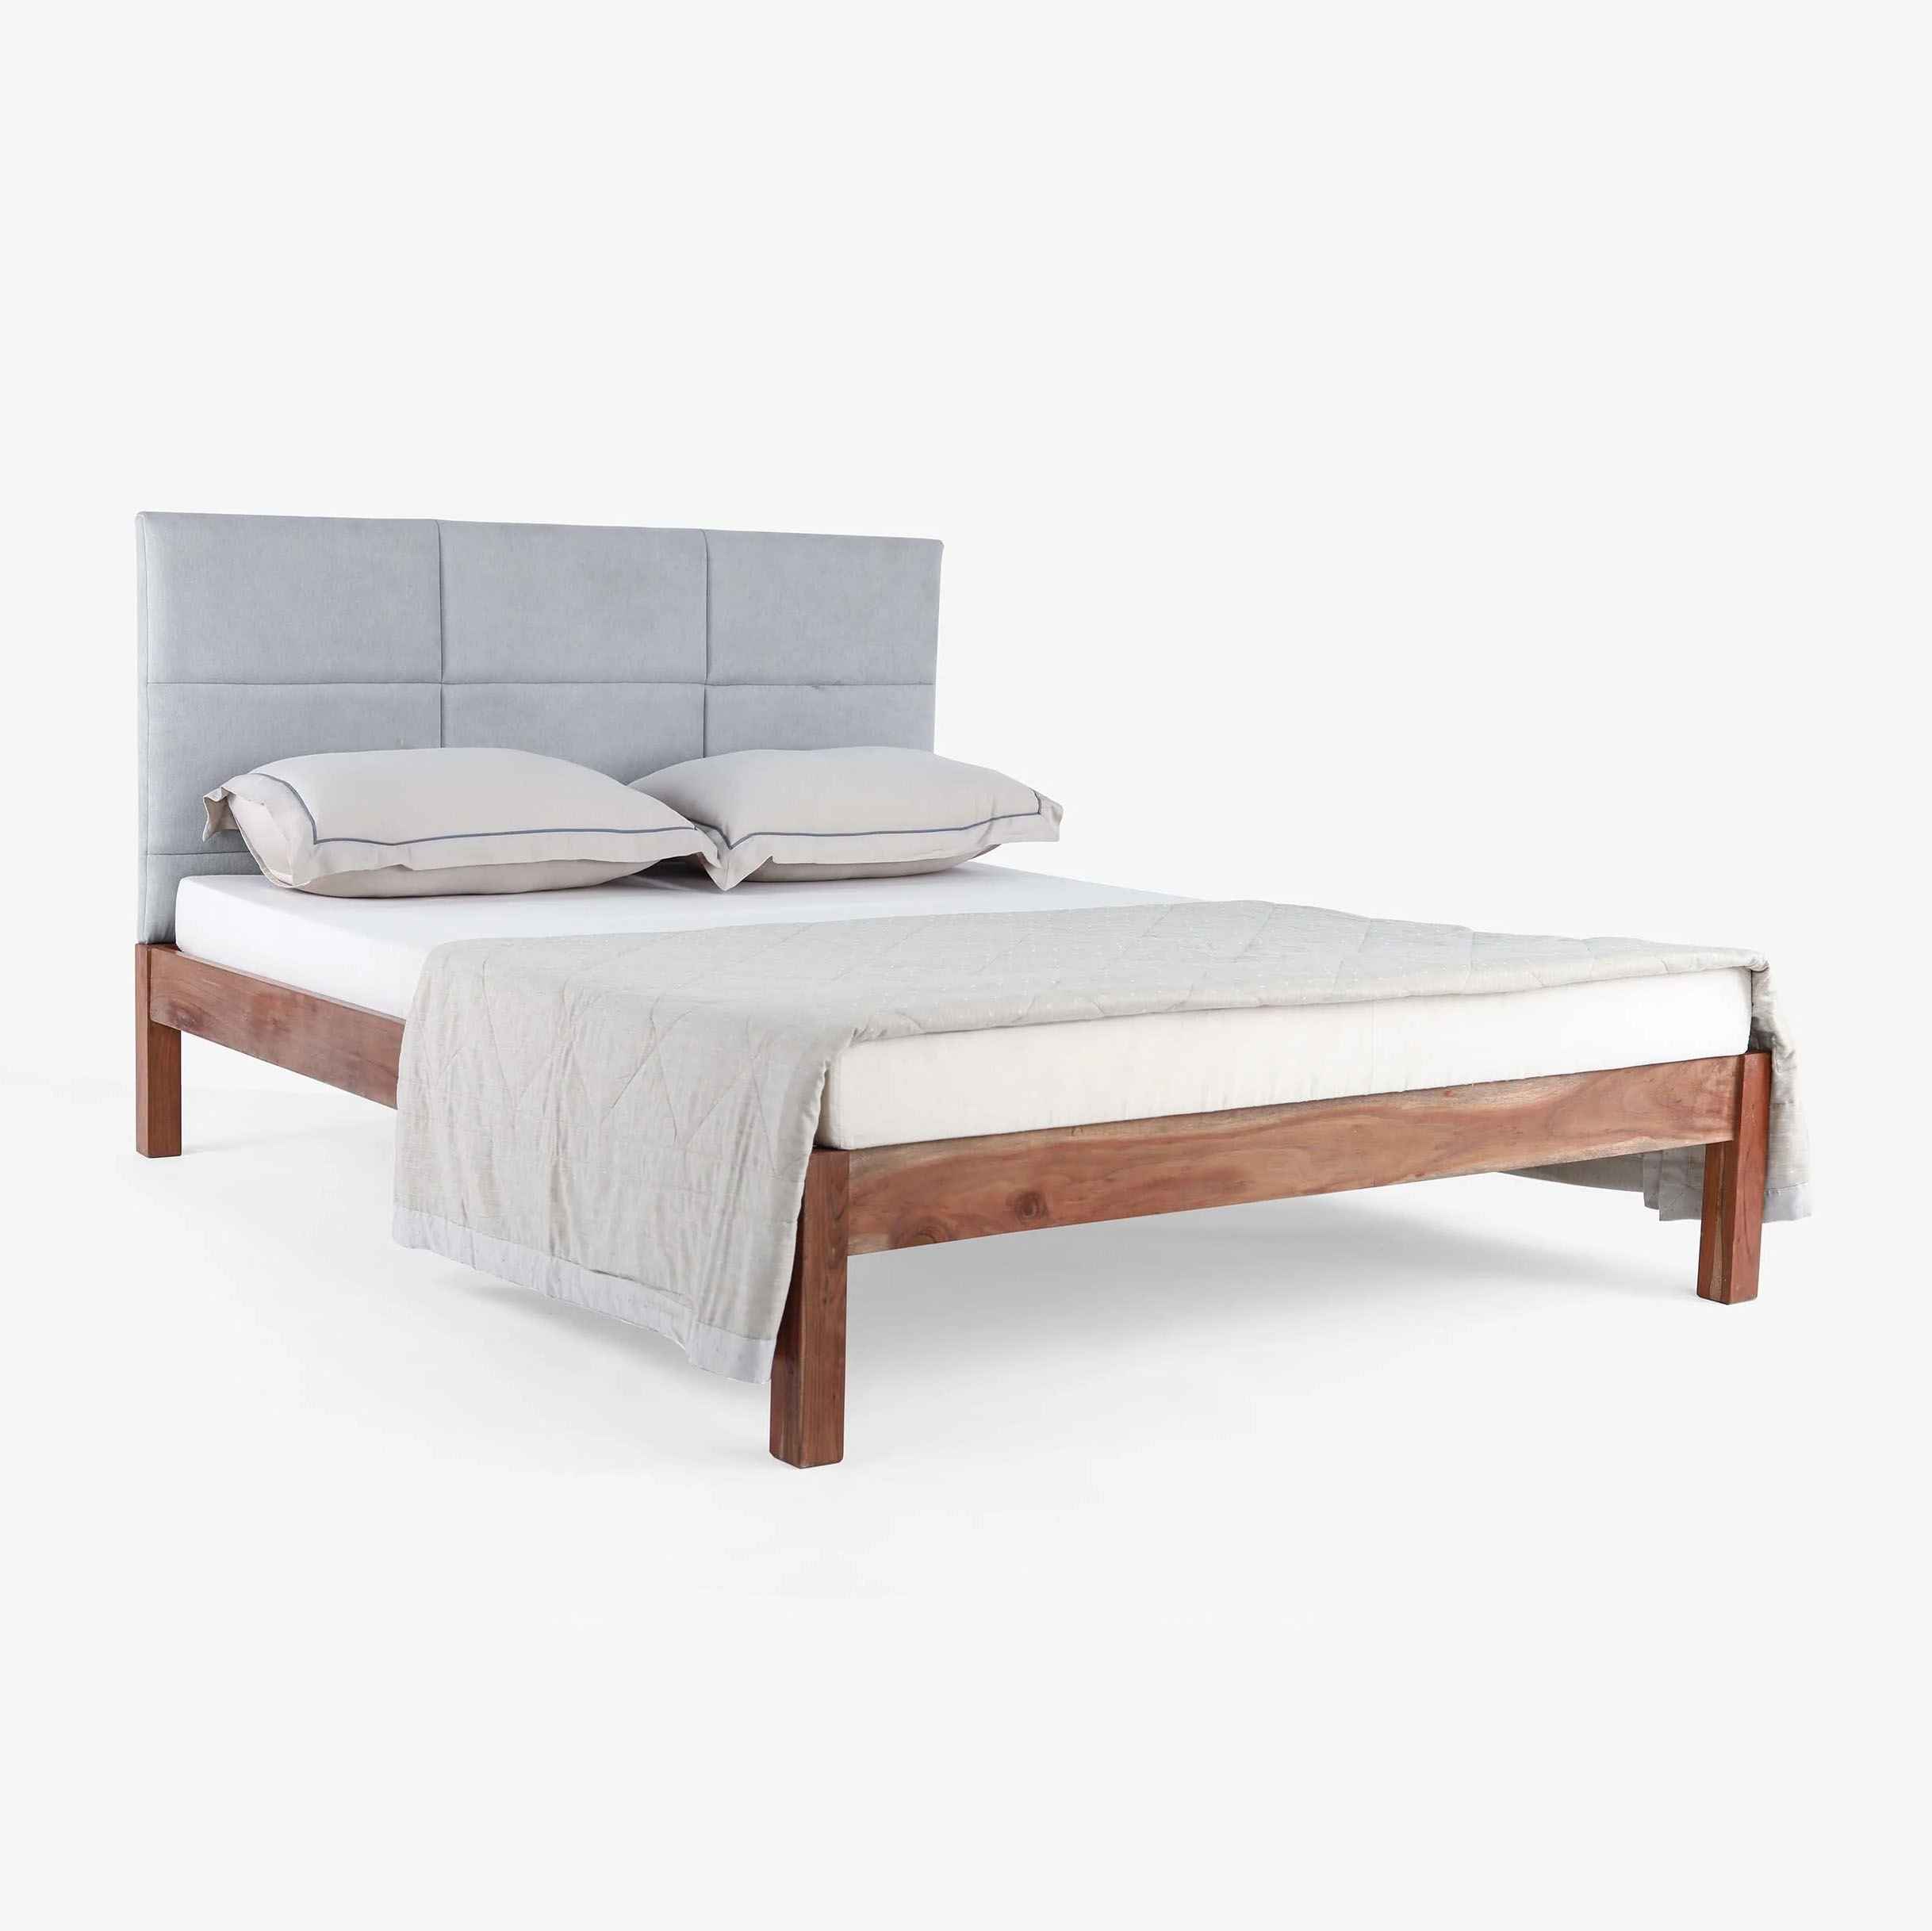 XINGTON UPHOLSTERED BED